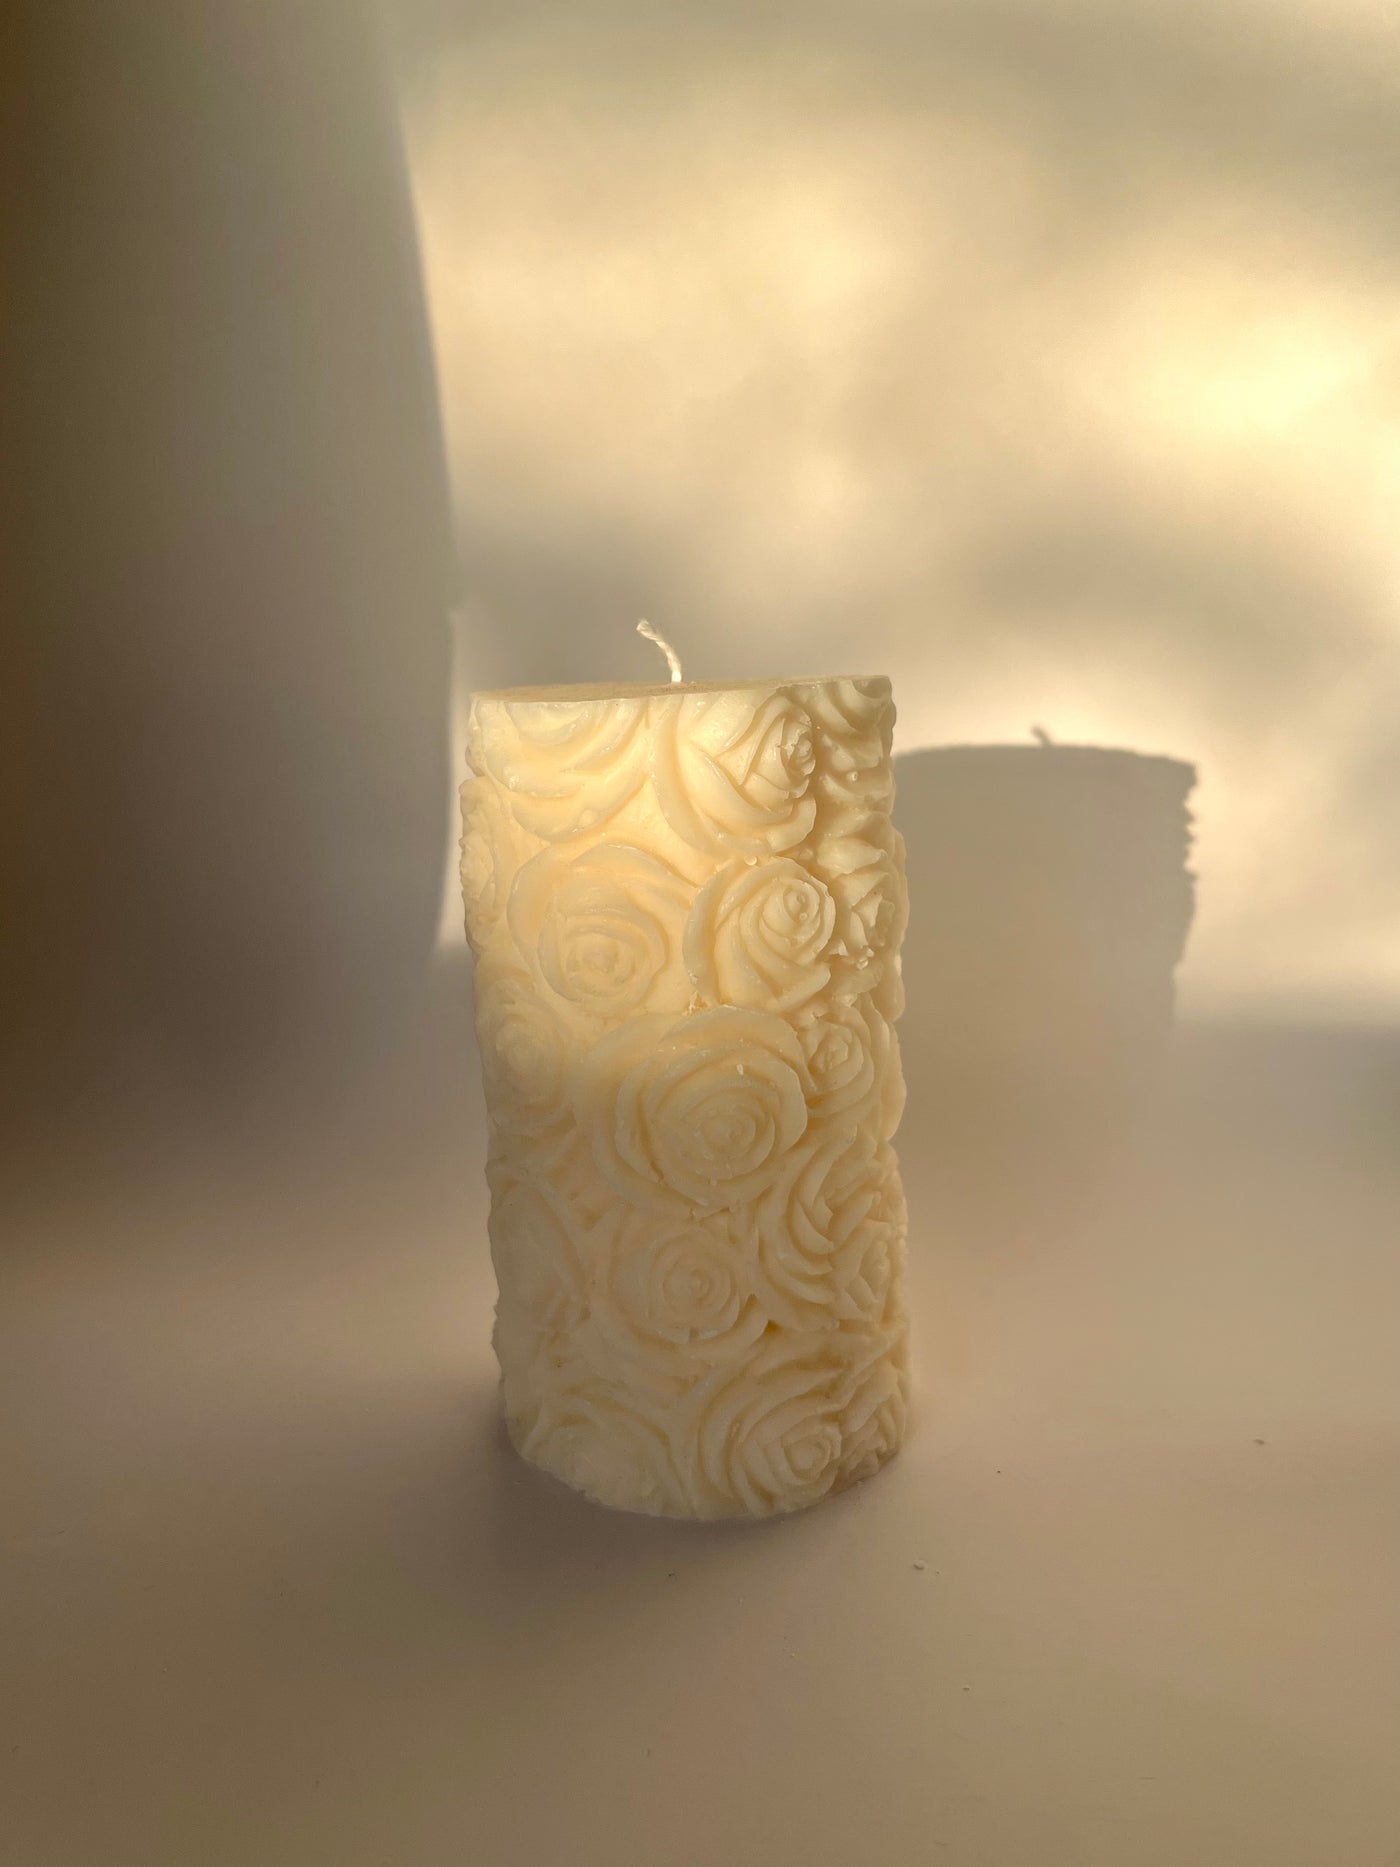 Flower Pillar Candle | Rose Pillar Candle | Valentine's Day Candles